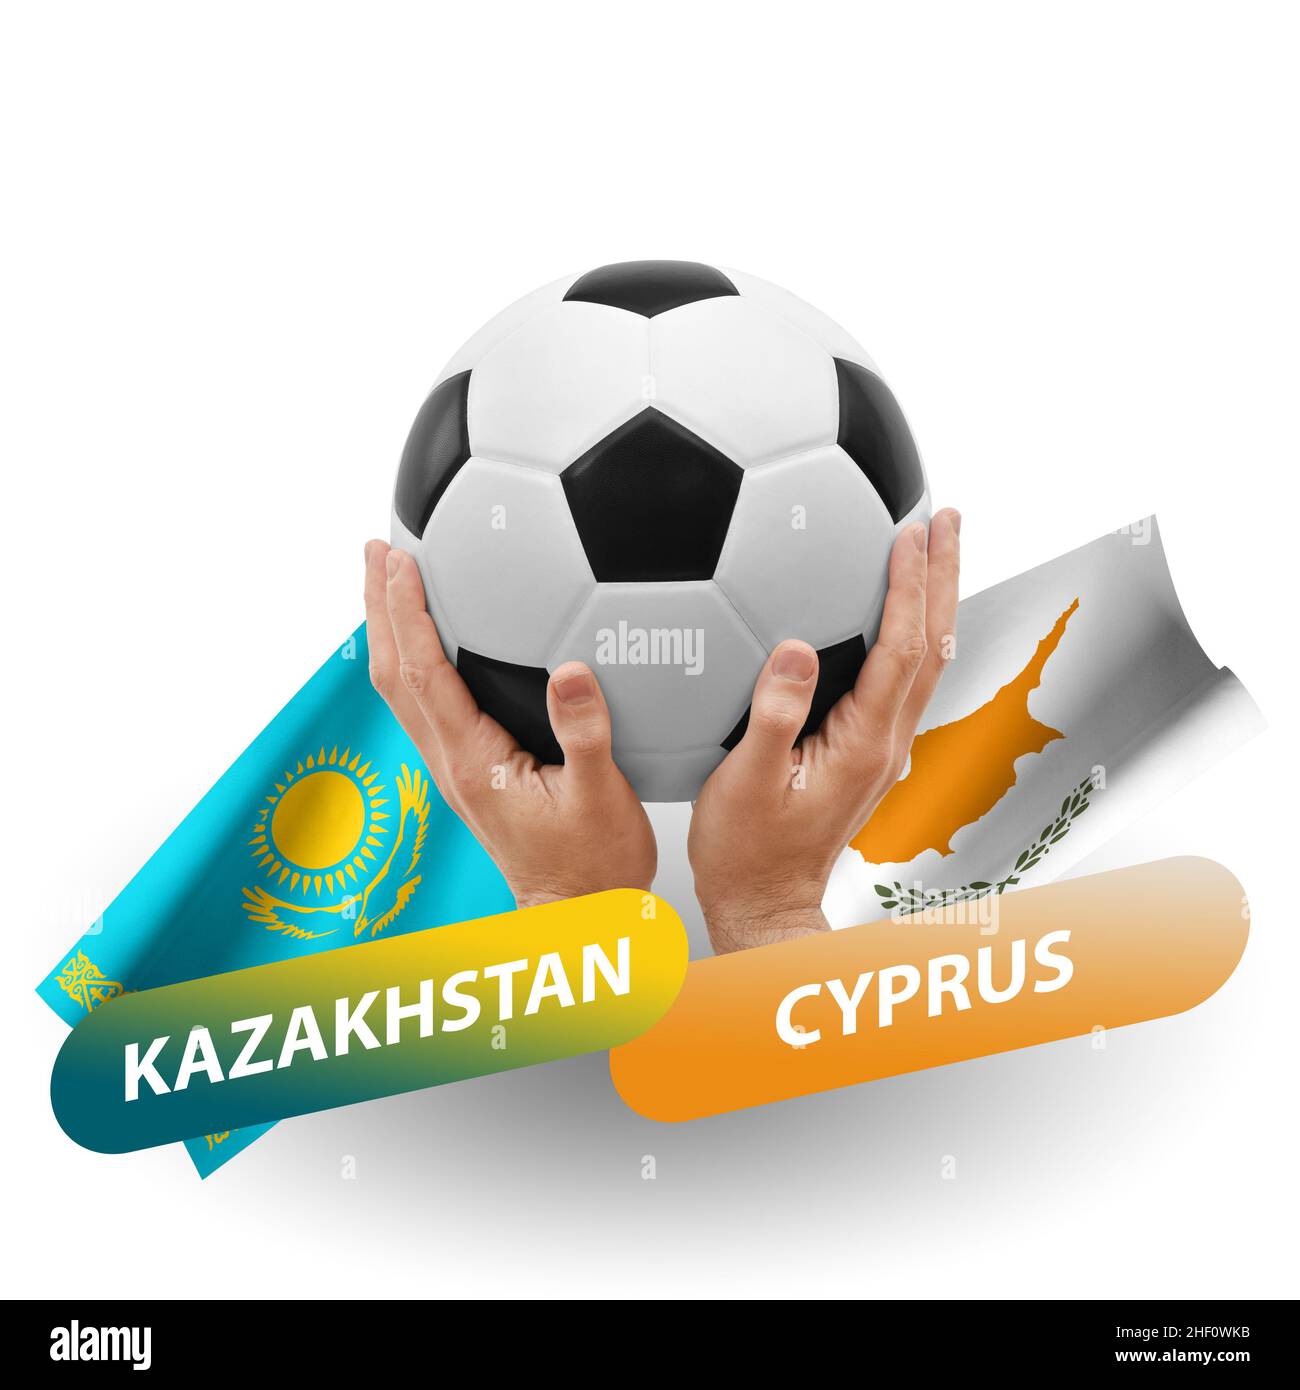 Cyprus national team Cut Out Stock Images & Pictures - Page 2 - Alamy